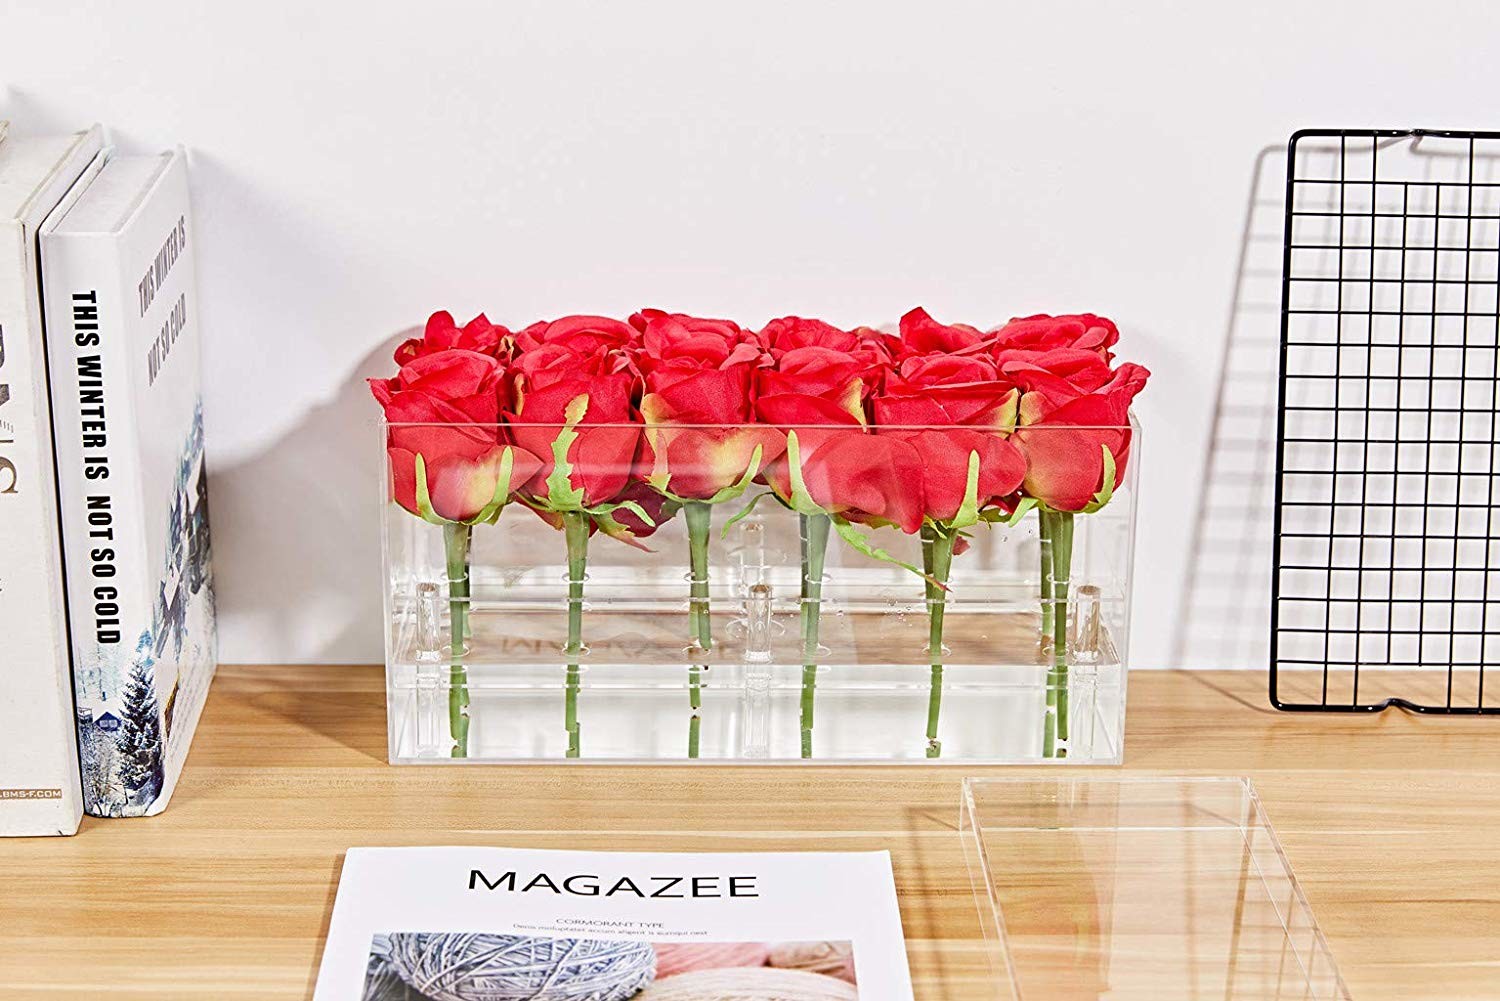 Best Waterproof Everlasting Roses Acrylic Box Daily Decoration For 25 Roses wholesale